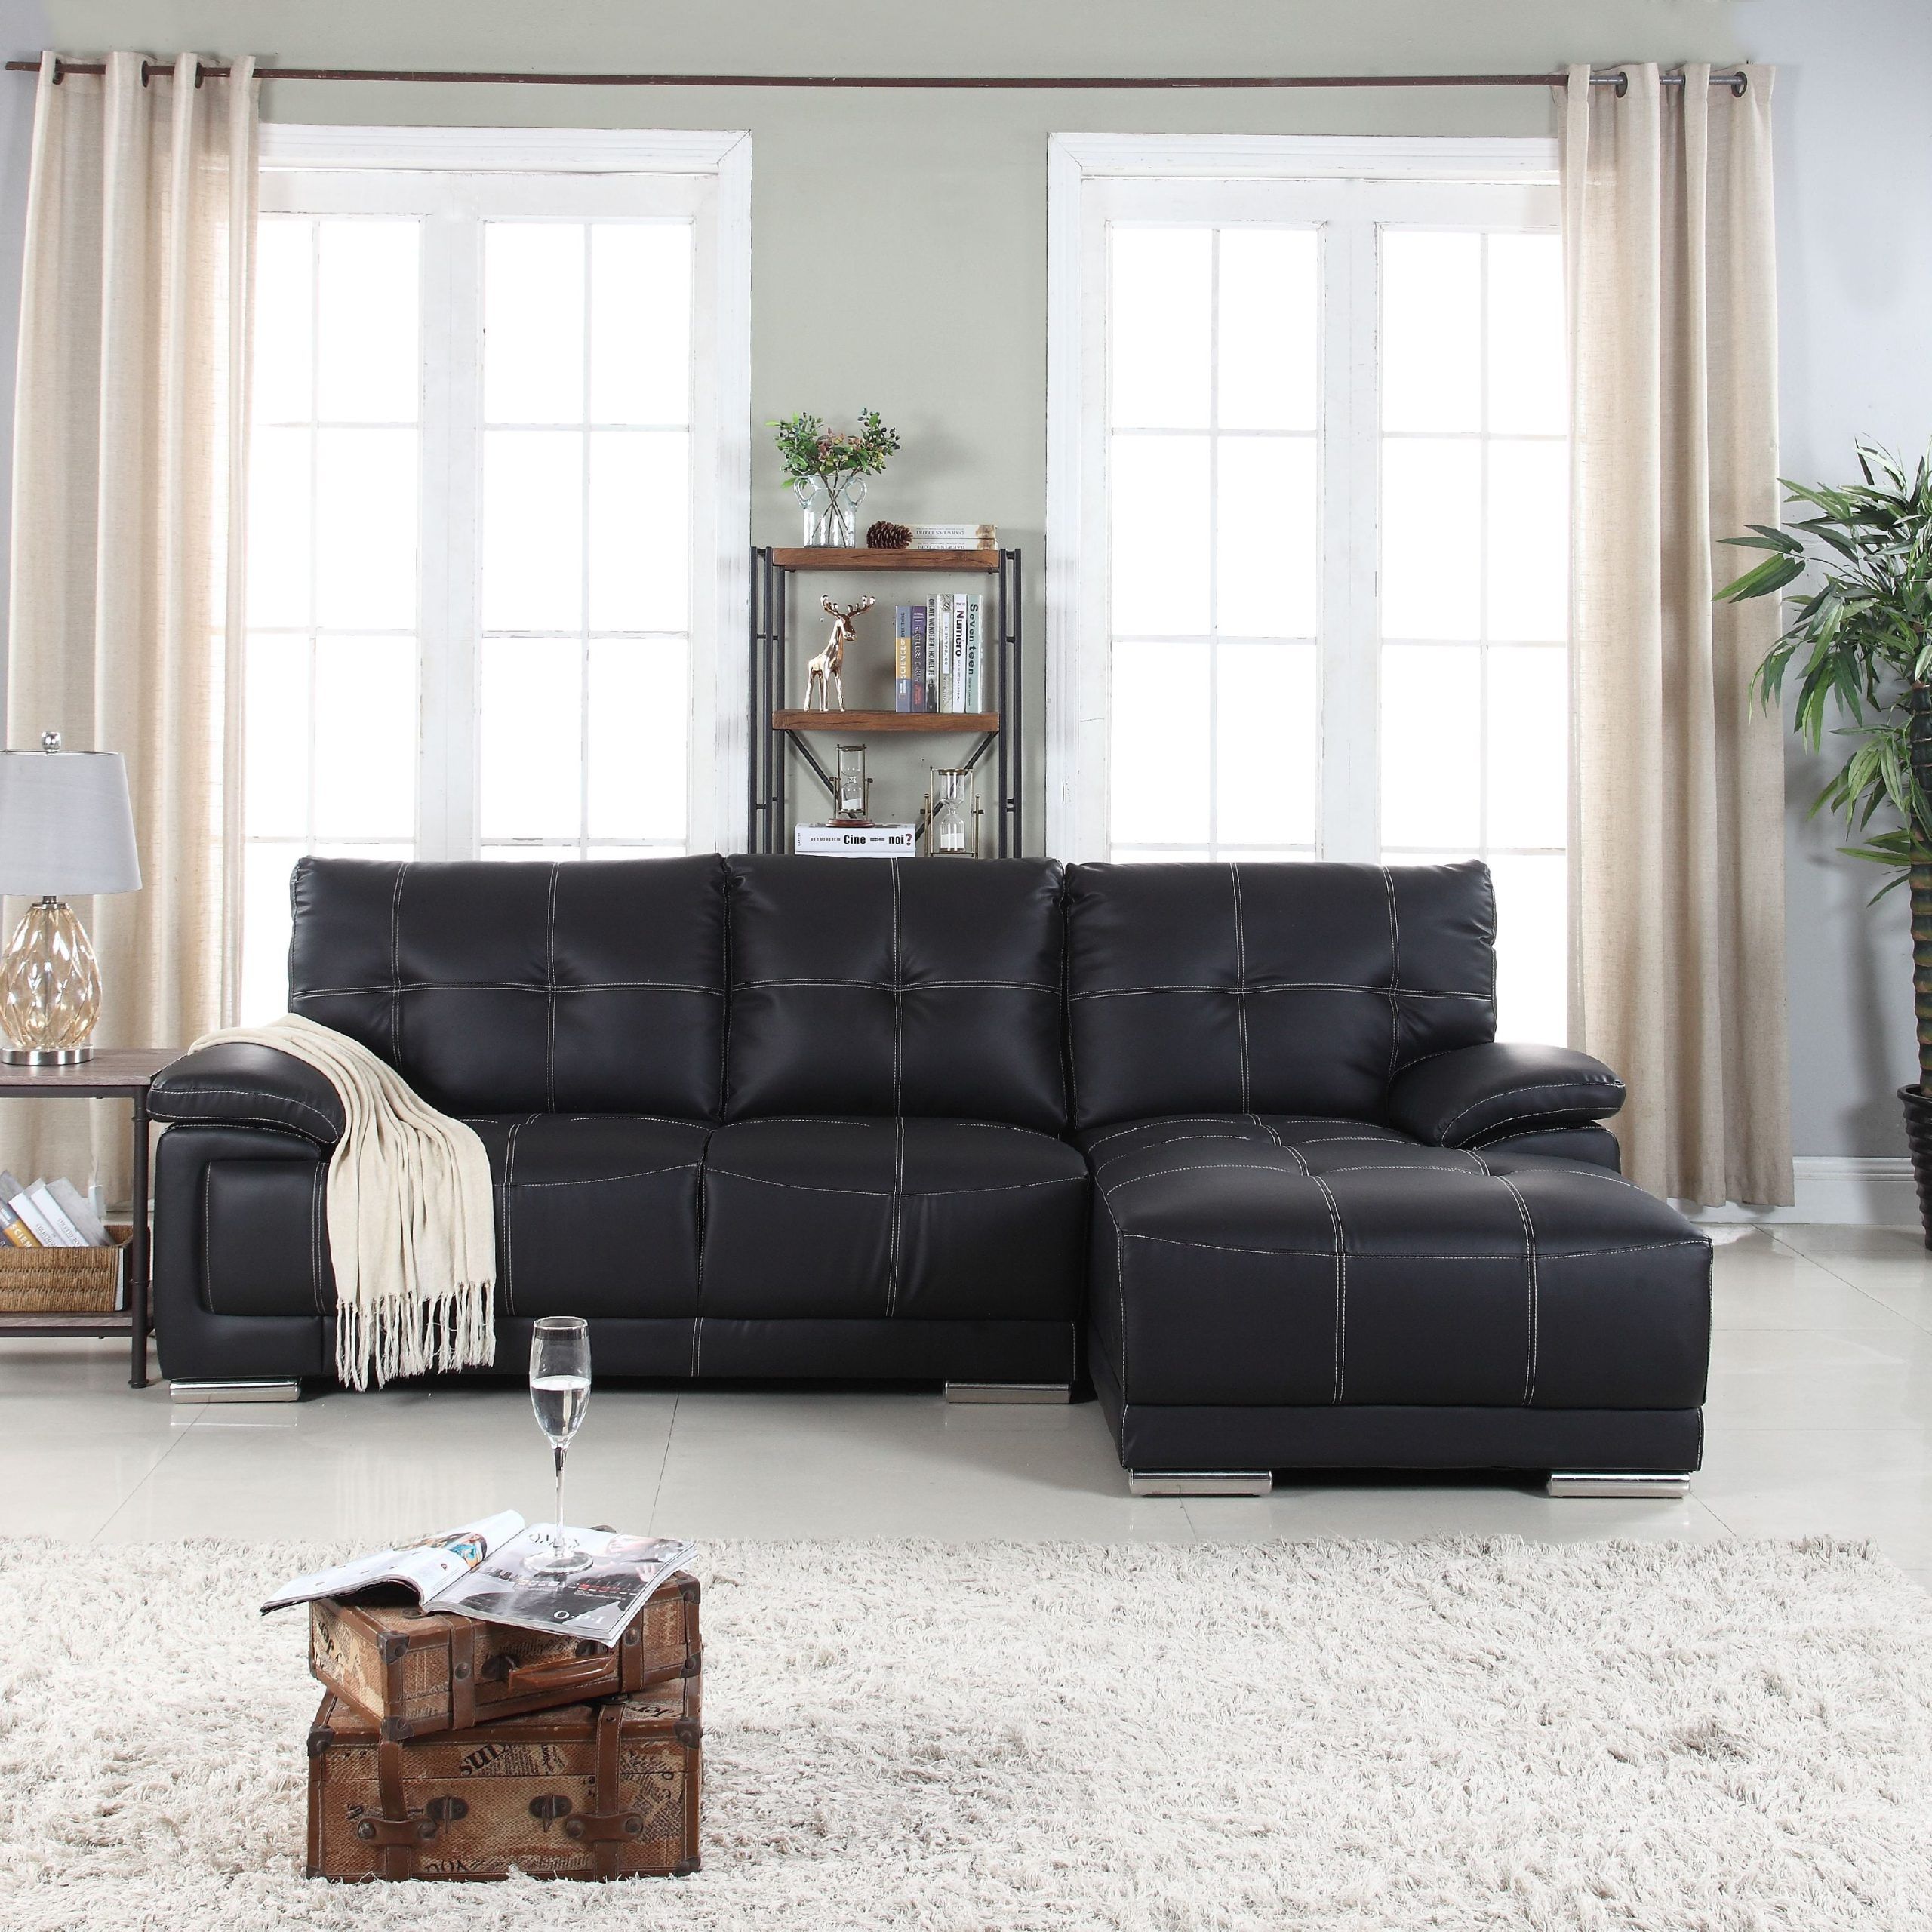 Classic Tufted Faux Leather Sectional Sofa – Walmart Intended For Faux Leather Sofas In Dark Brown (View 19 of 20)